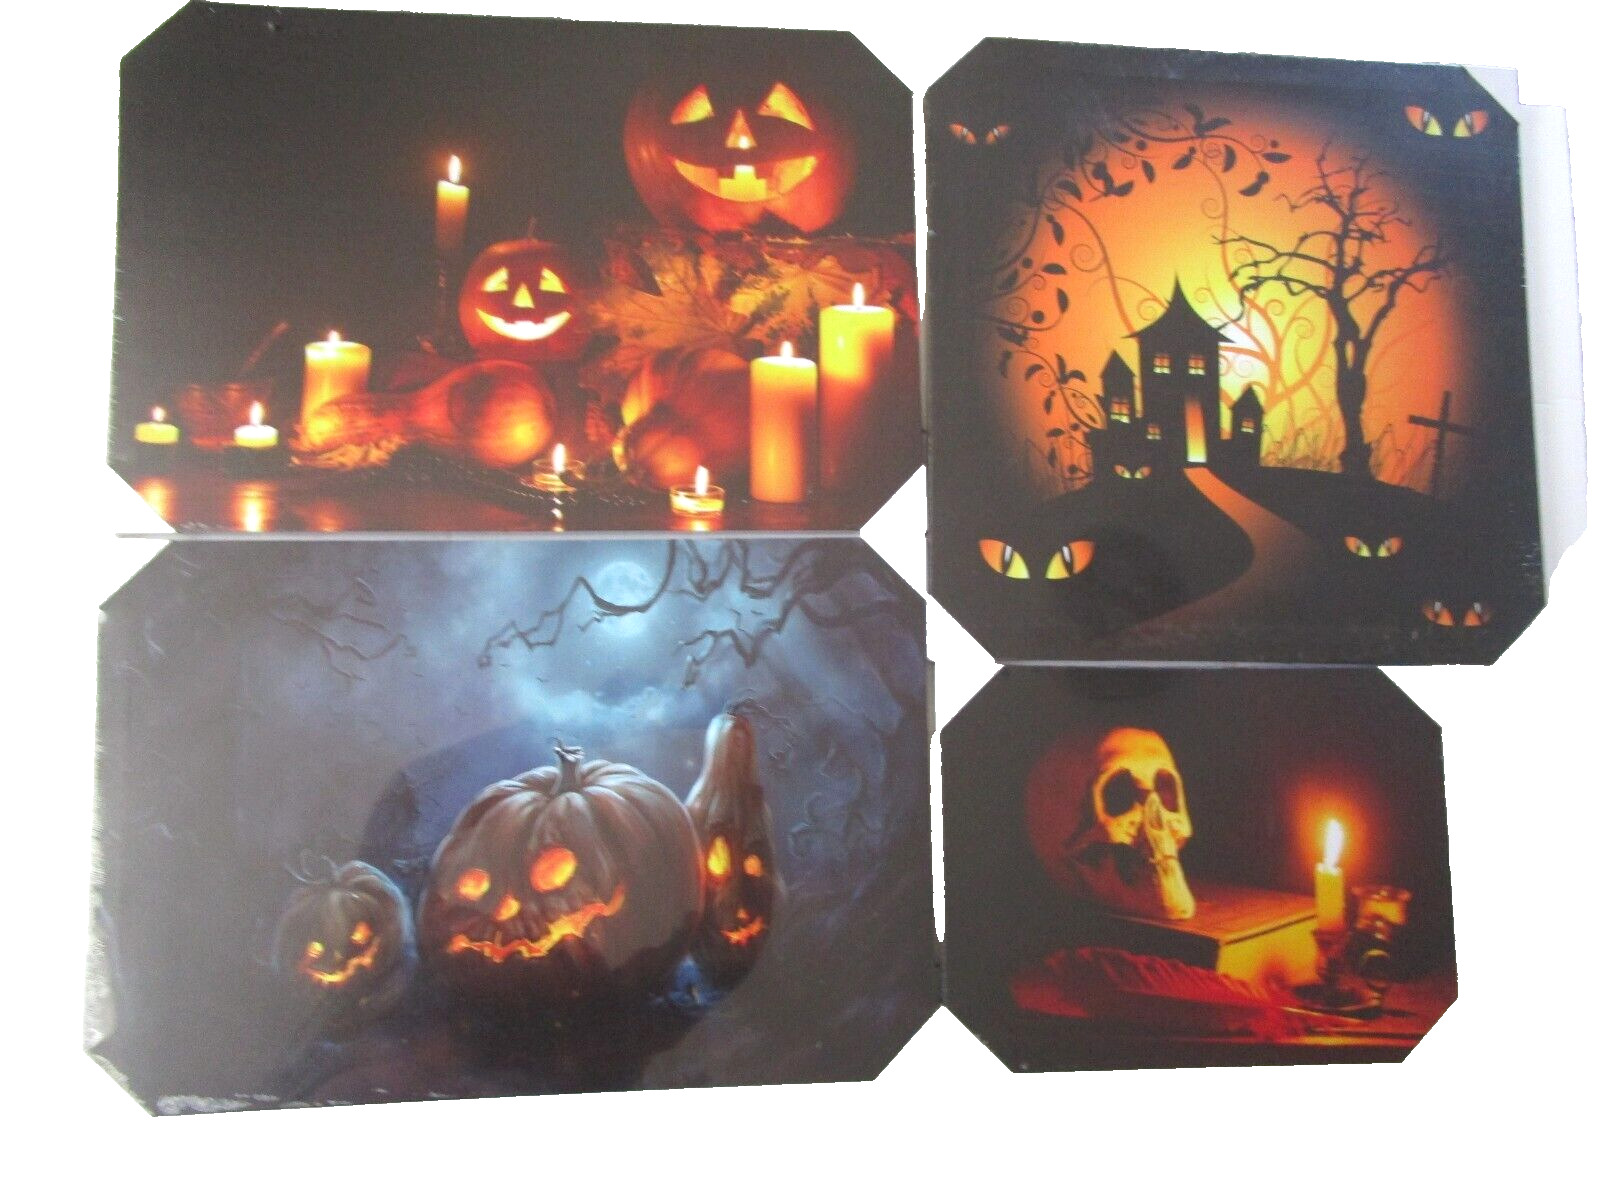 Lot of 4 NORTHLIGHTS Halloween Wall Art Canvas Lighted NEW SEALED  Large 3 Sizes